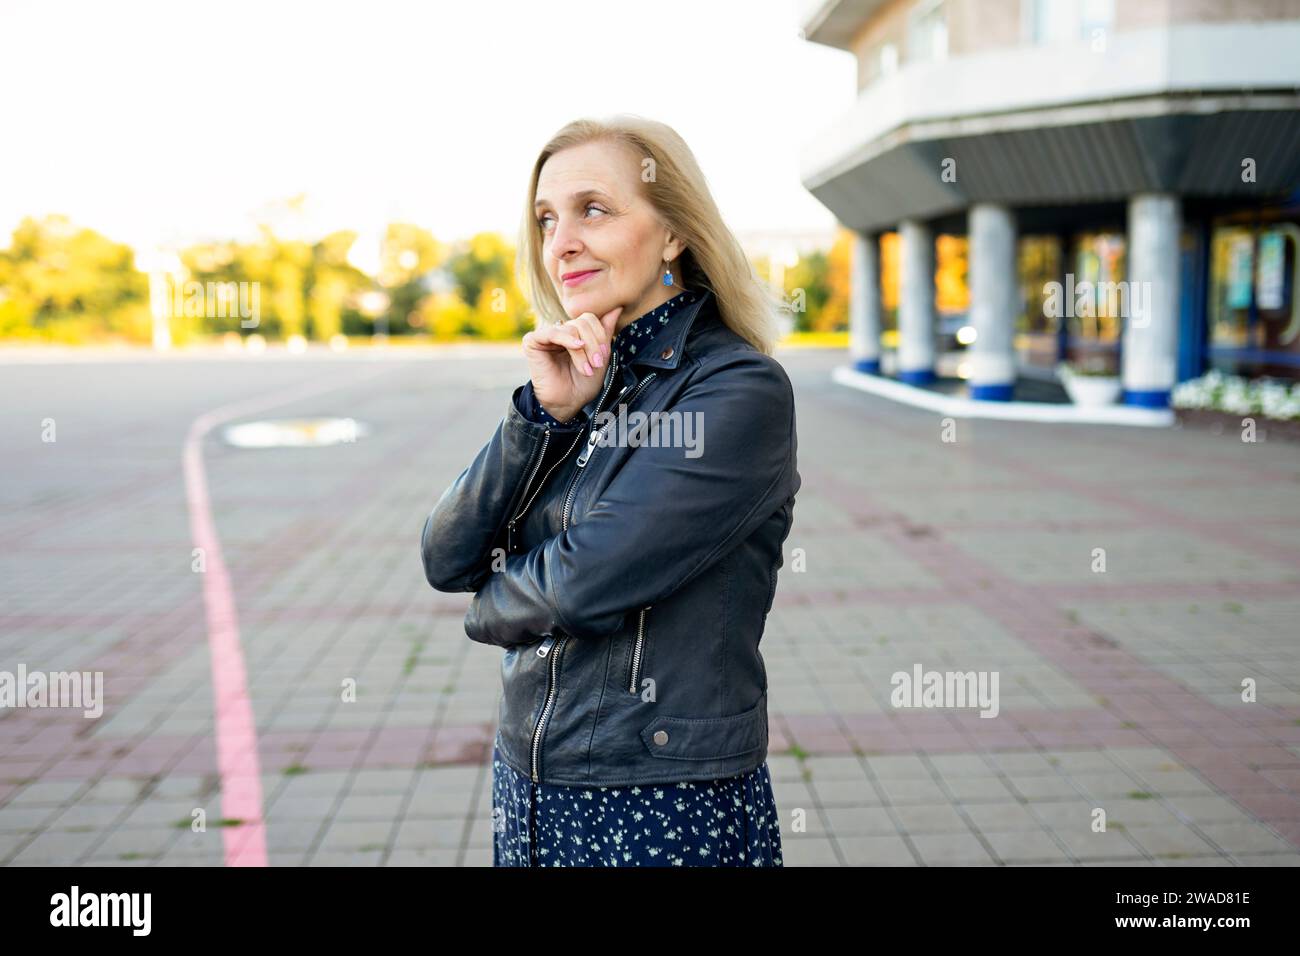 Portrait of thoughtful woman standing in front of building Stock Photo